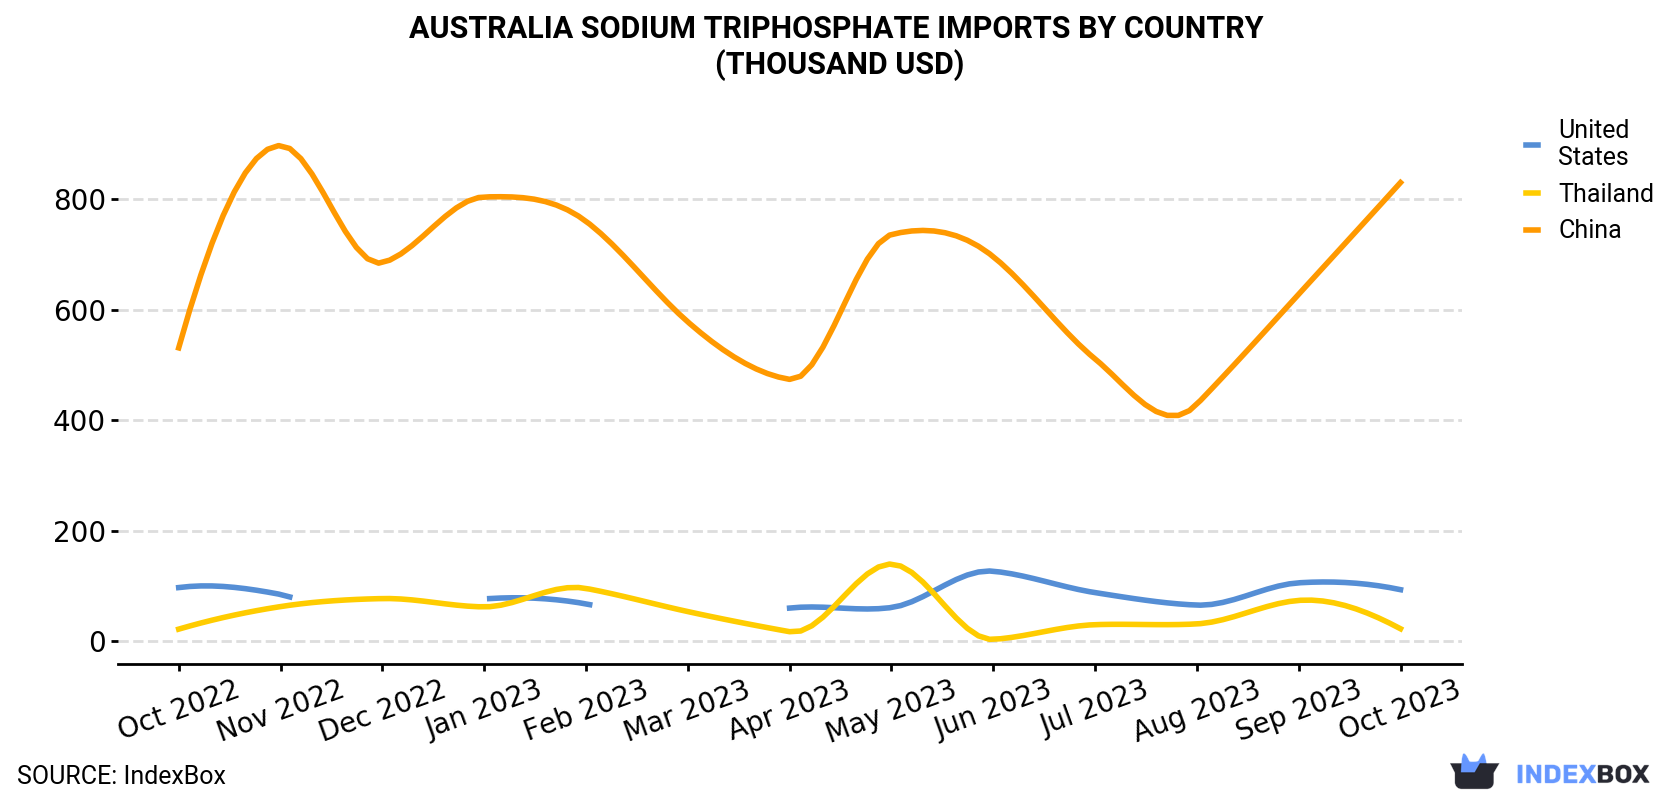 Australia Sodium Triphosphate Imports By Country (Thousand USD)